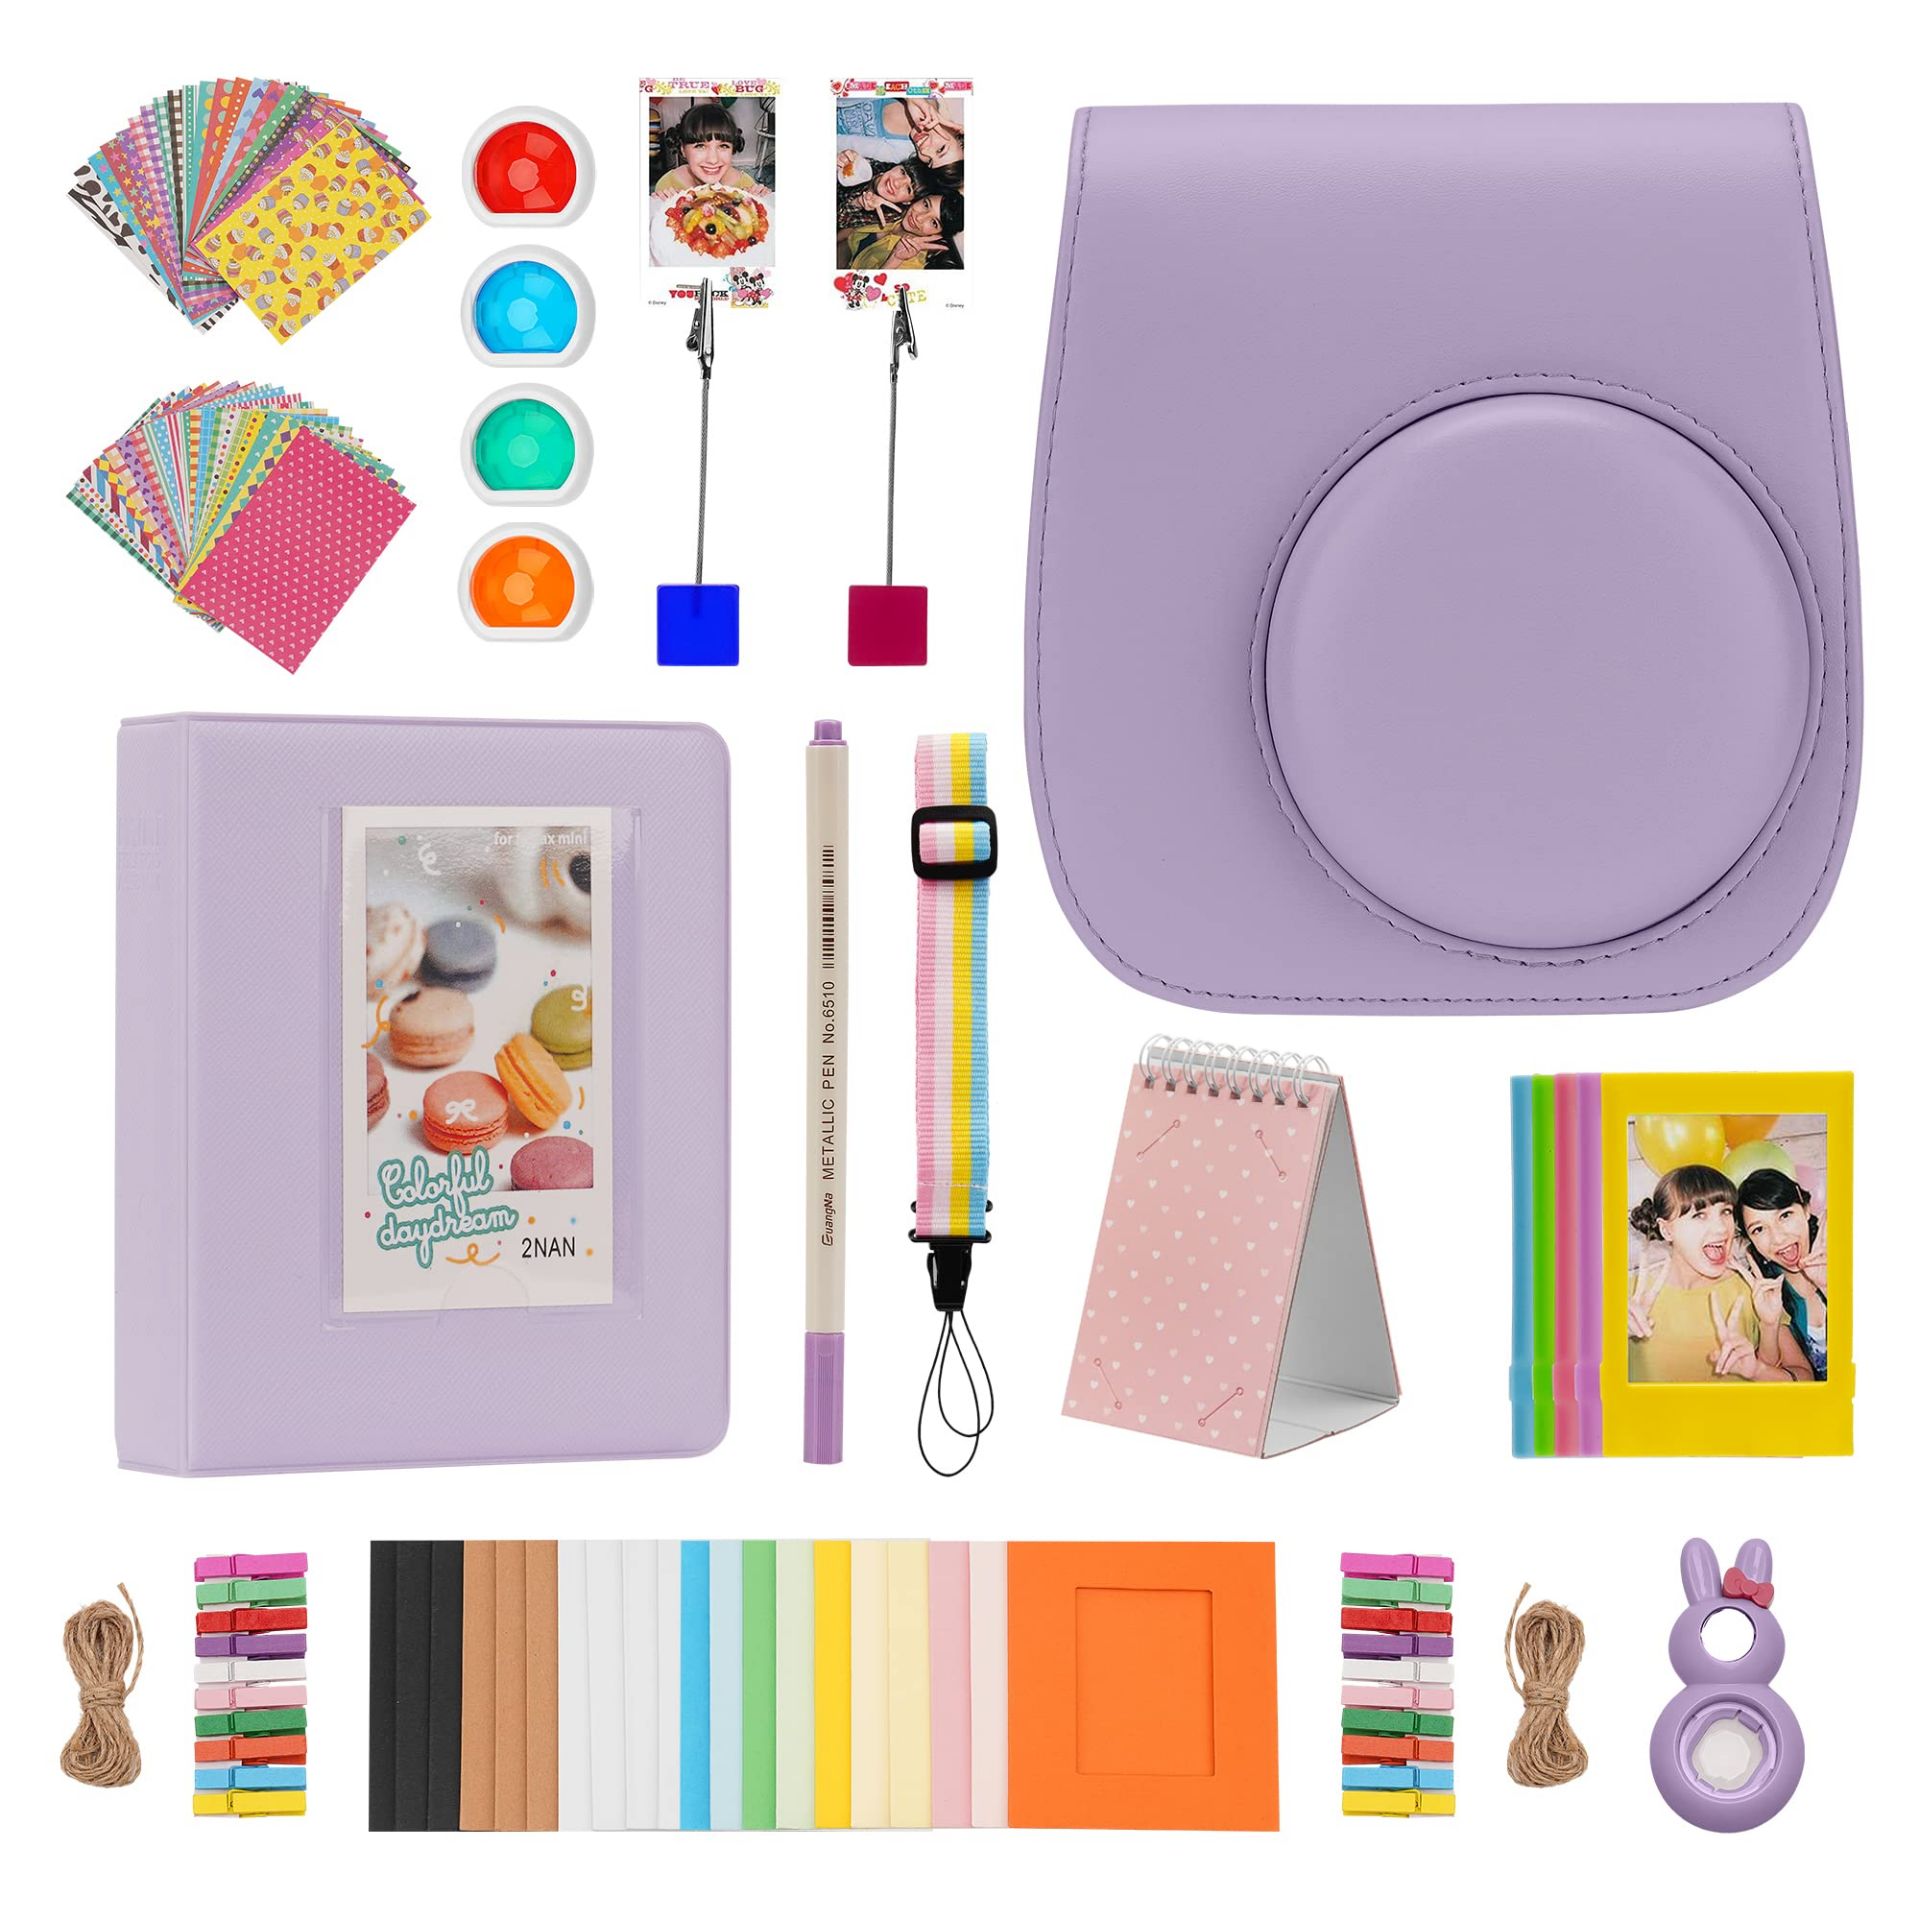 RRP £383.40 Total, Lot Consisting of 18 Items - See Description. - Image 5 of 9